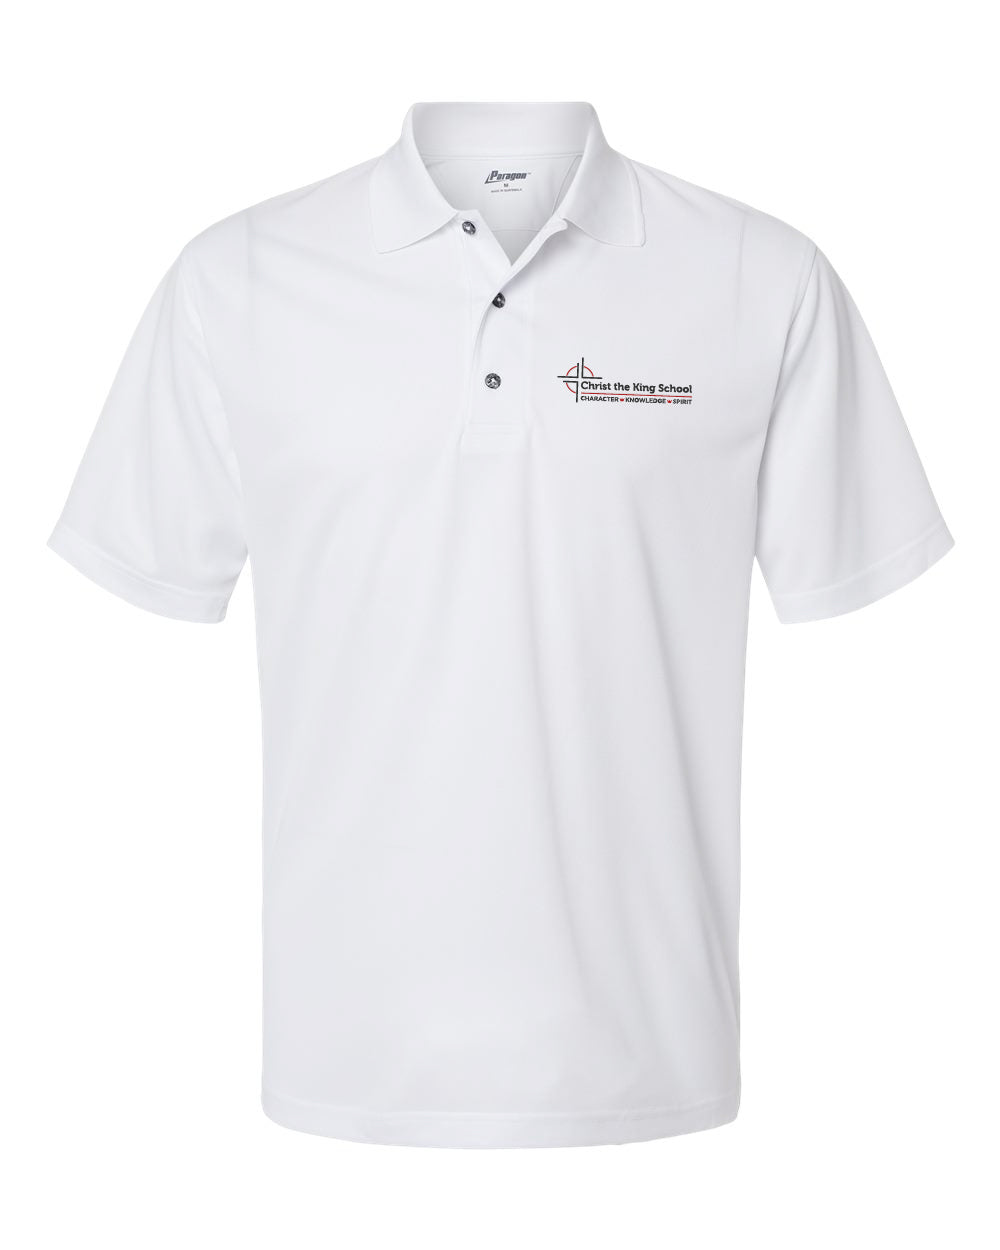 YOUTH - Dry Fit Short Sleeve Polo White